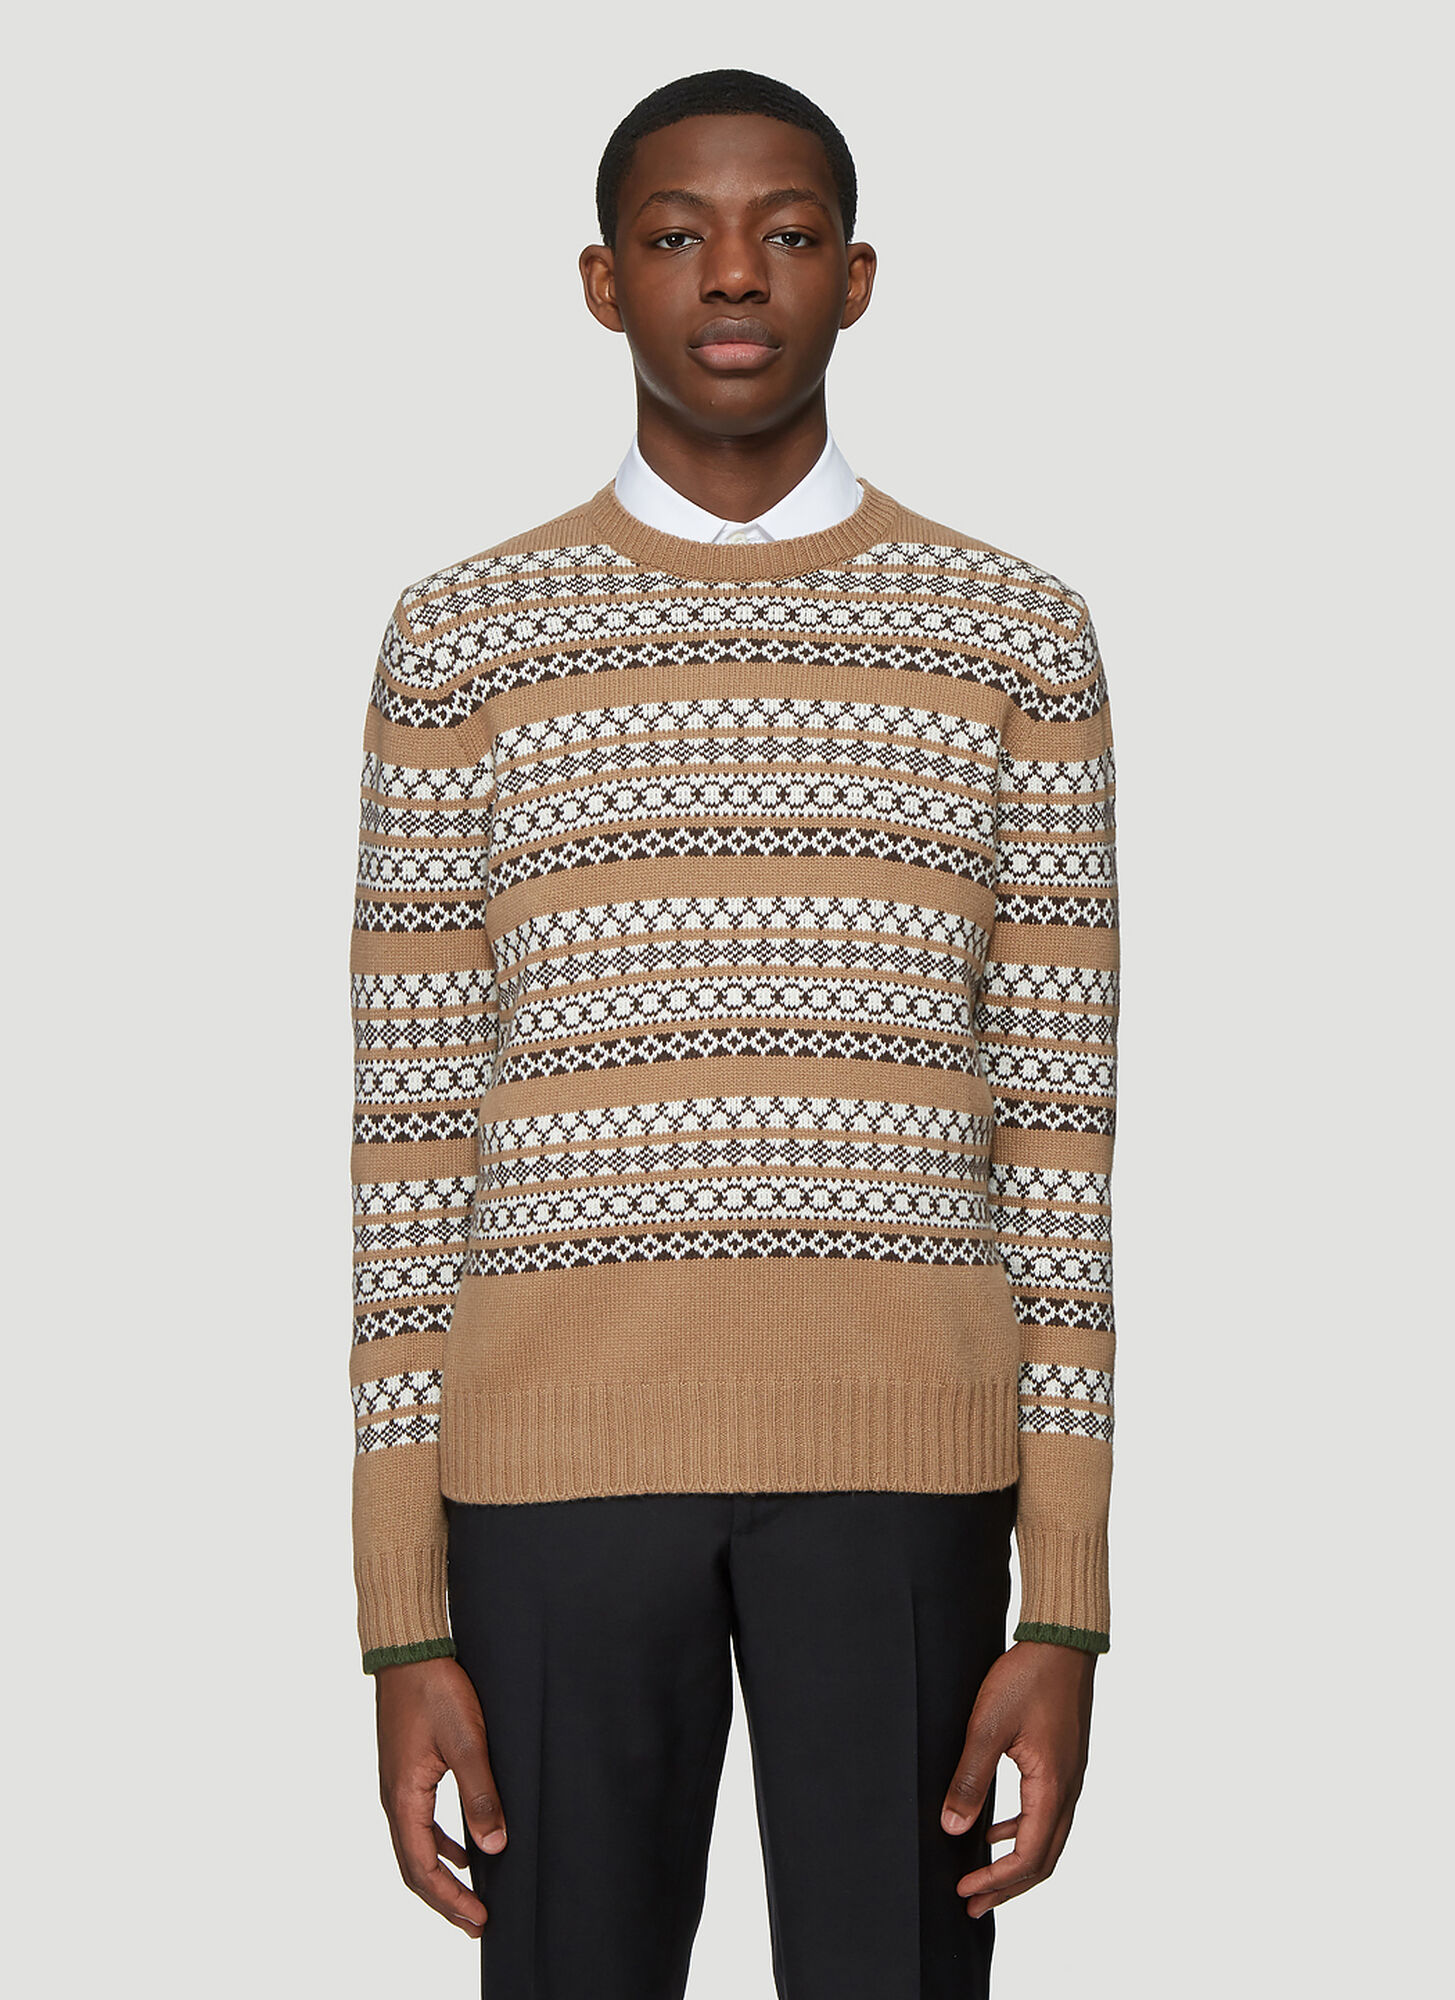 Prada Pattern Knit Sweater in Brown size IT 48 The Fashionisto